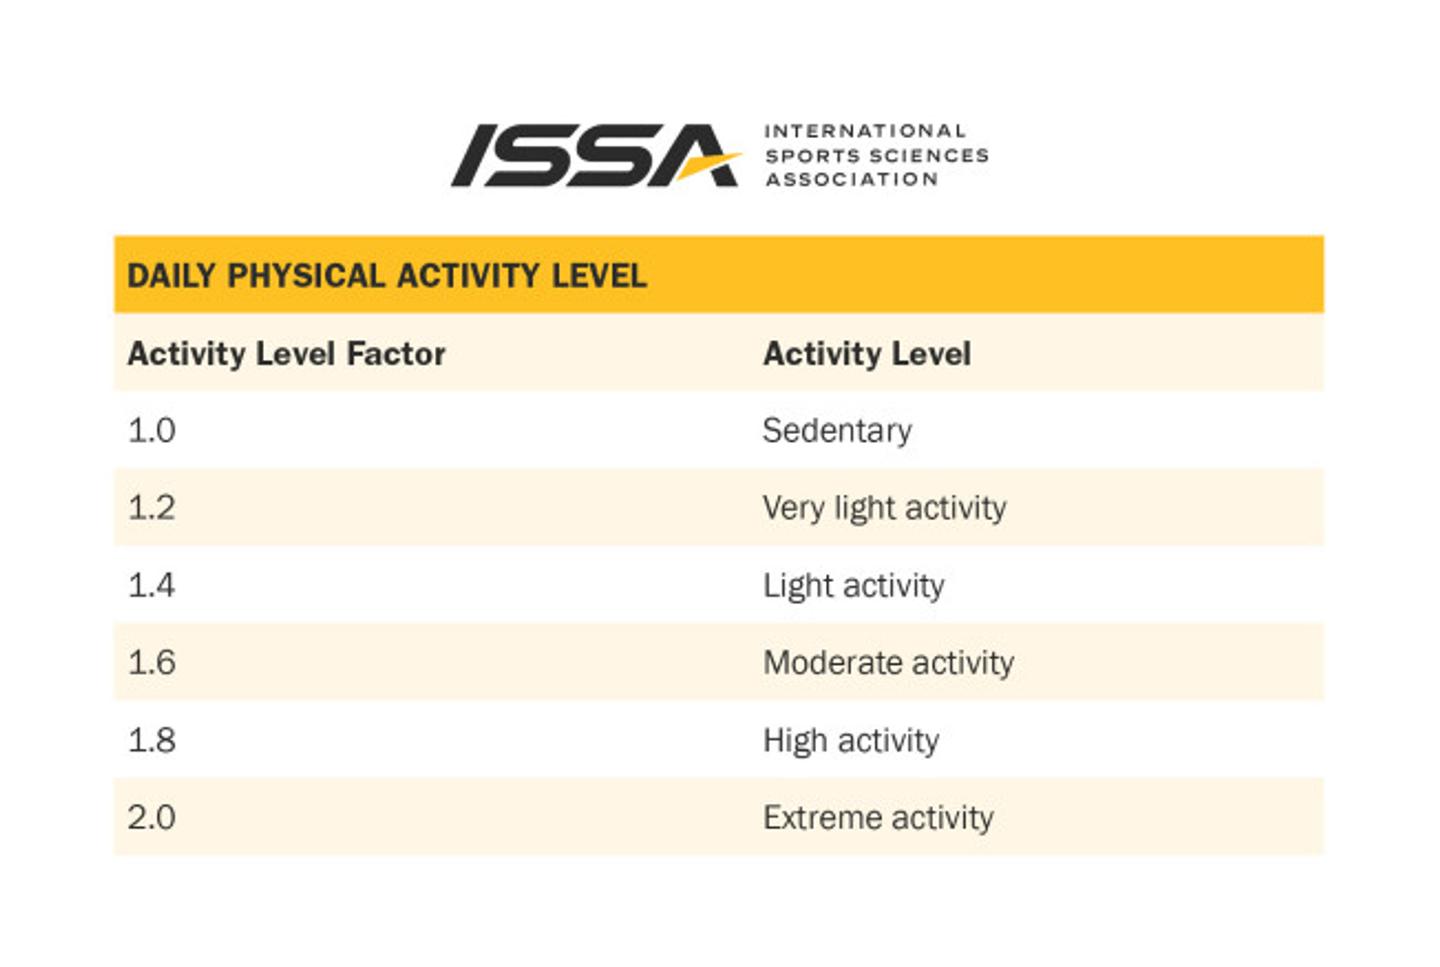 ISSA, International Sports Sciences Association, Certified Personal Trainer, ISSAonline, Calculating Calories for Weight Loss